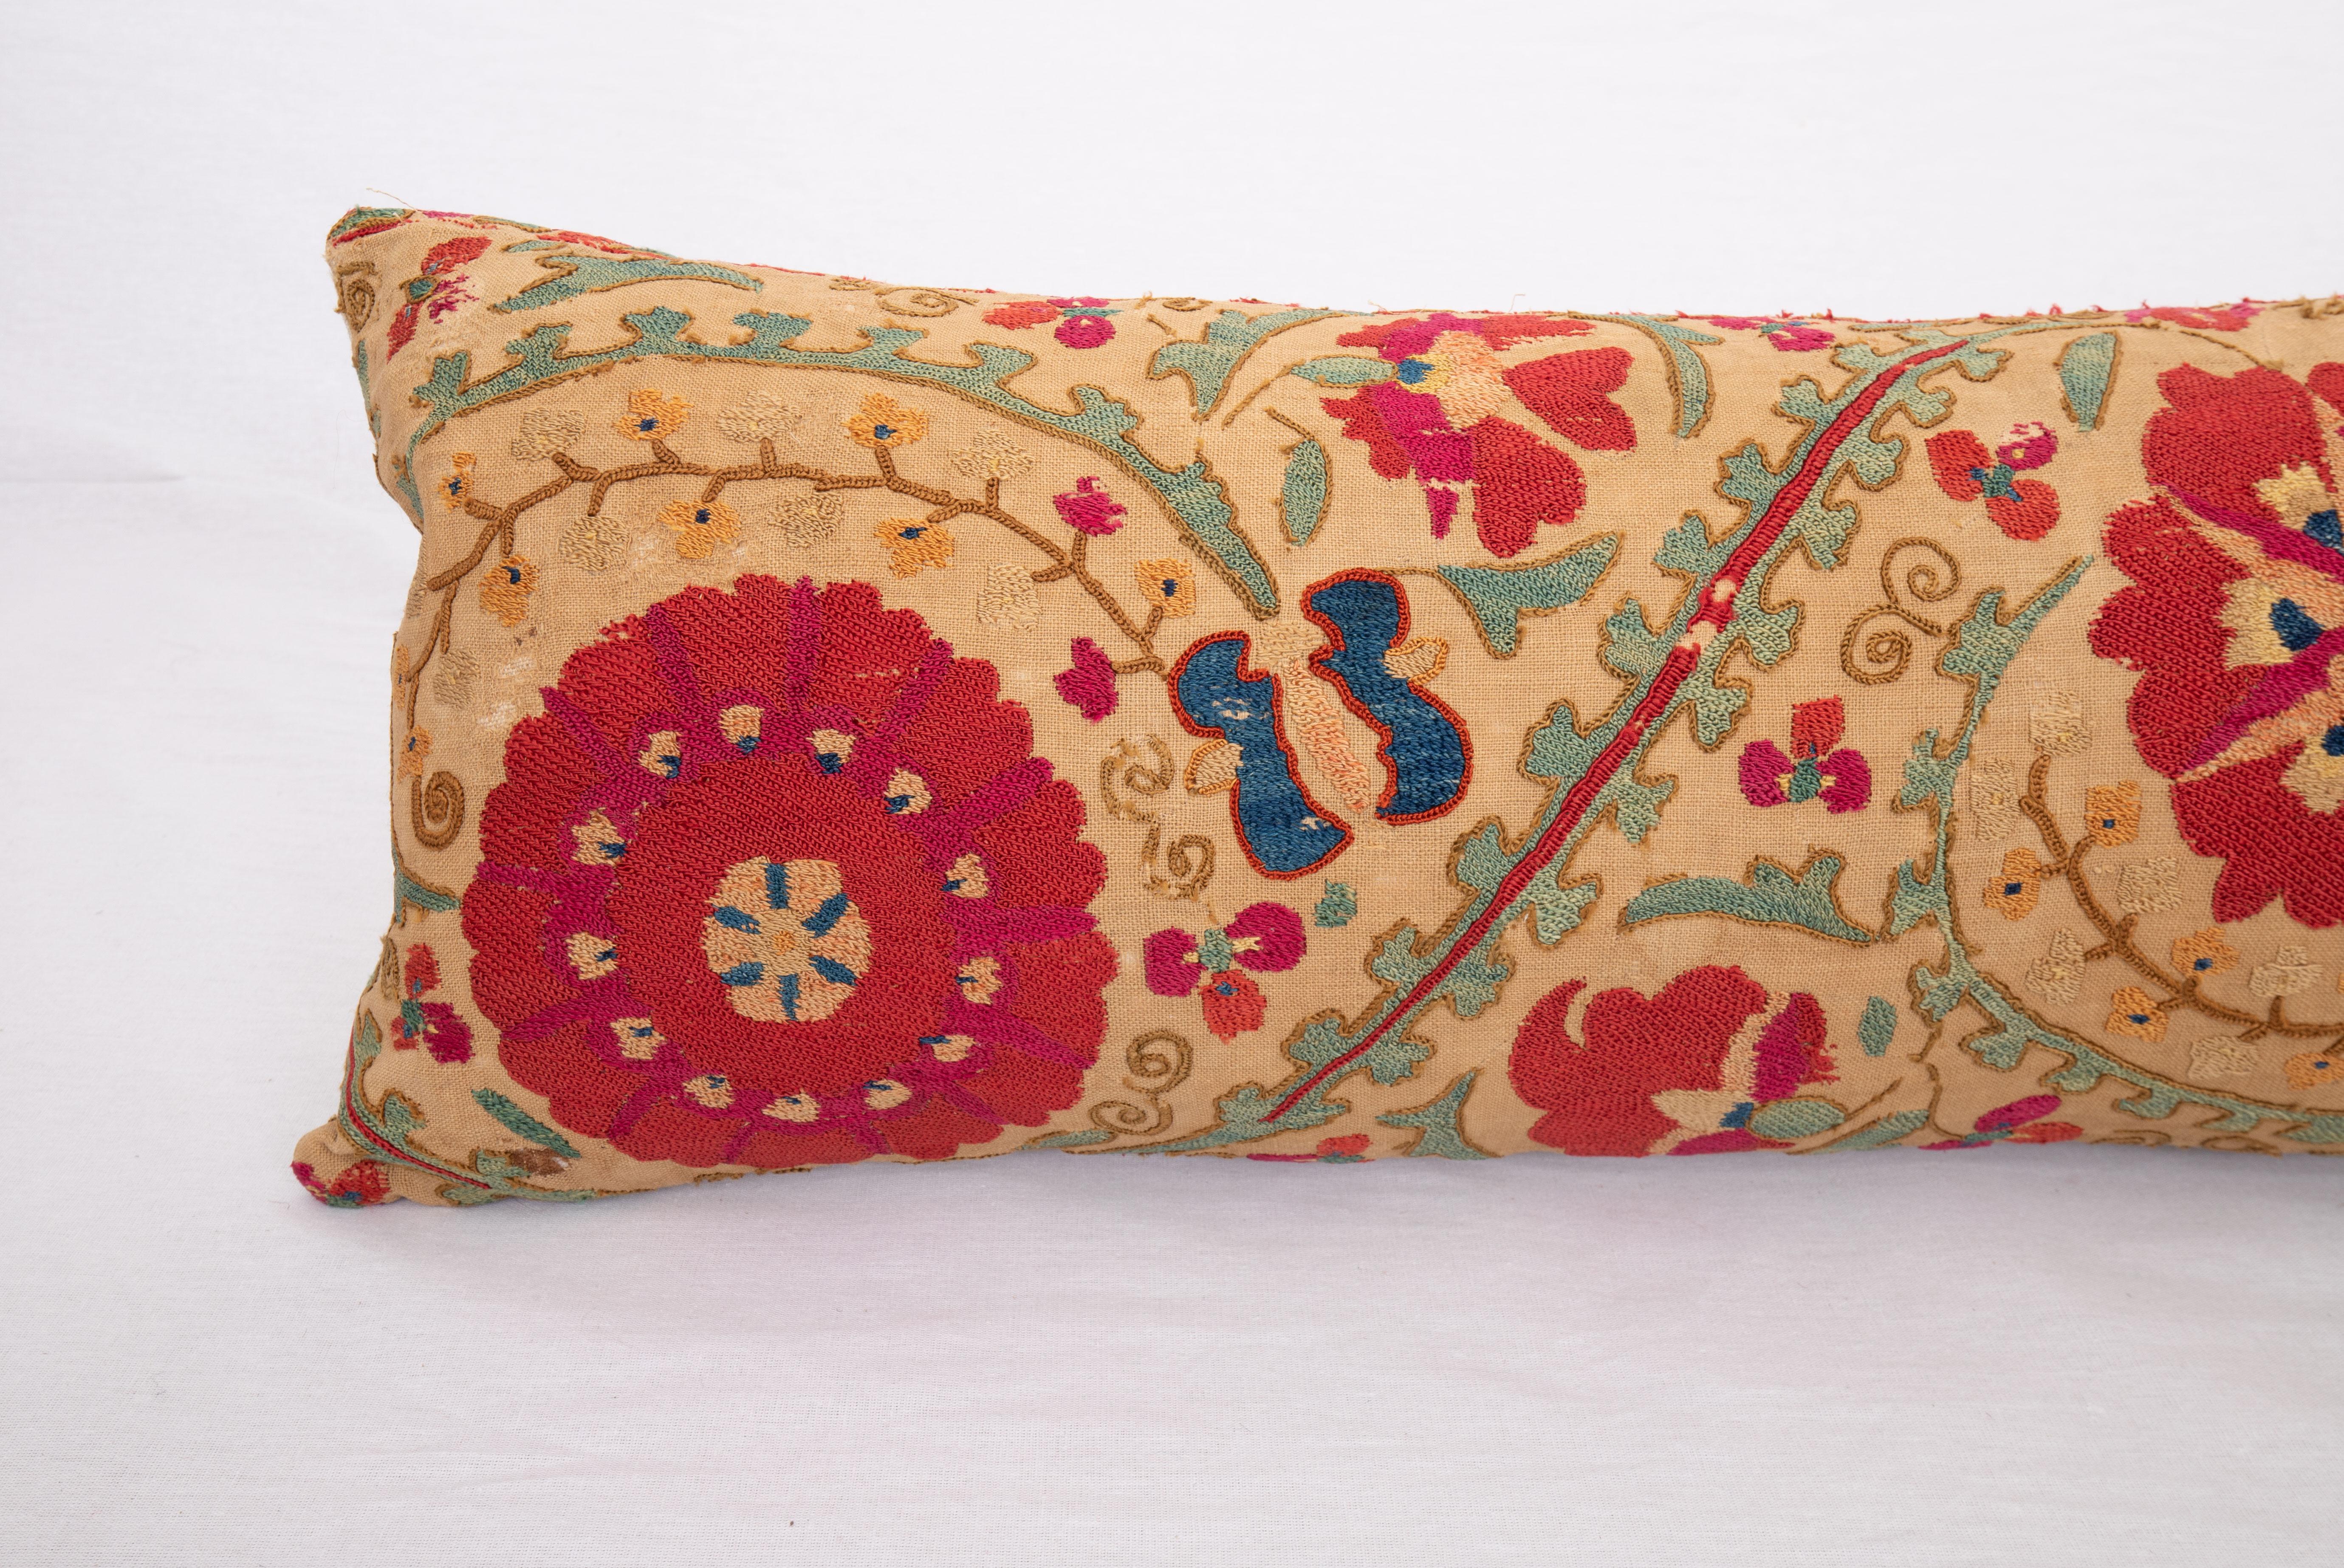 Embroidered Suzani Pillow Case Made from an Antique Suzani Fragment, 19th Century